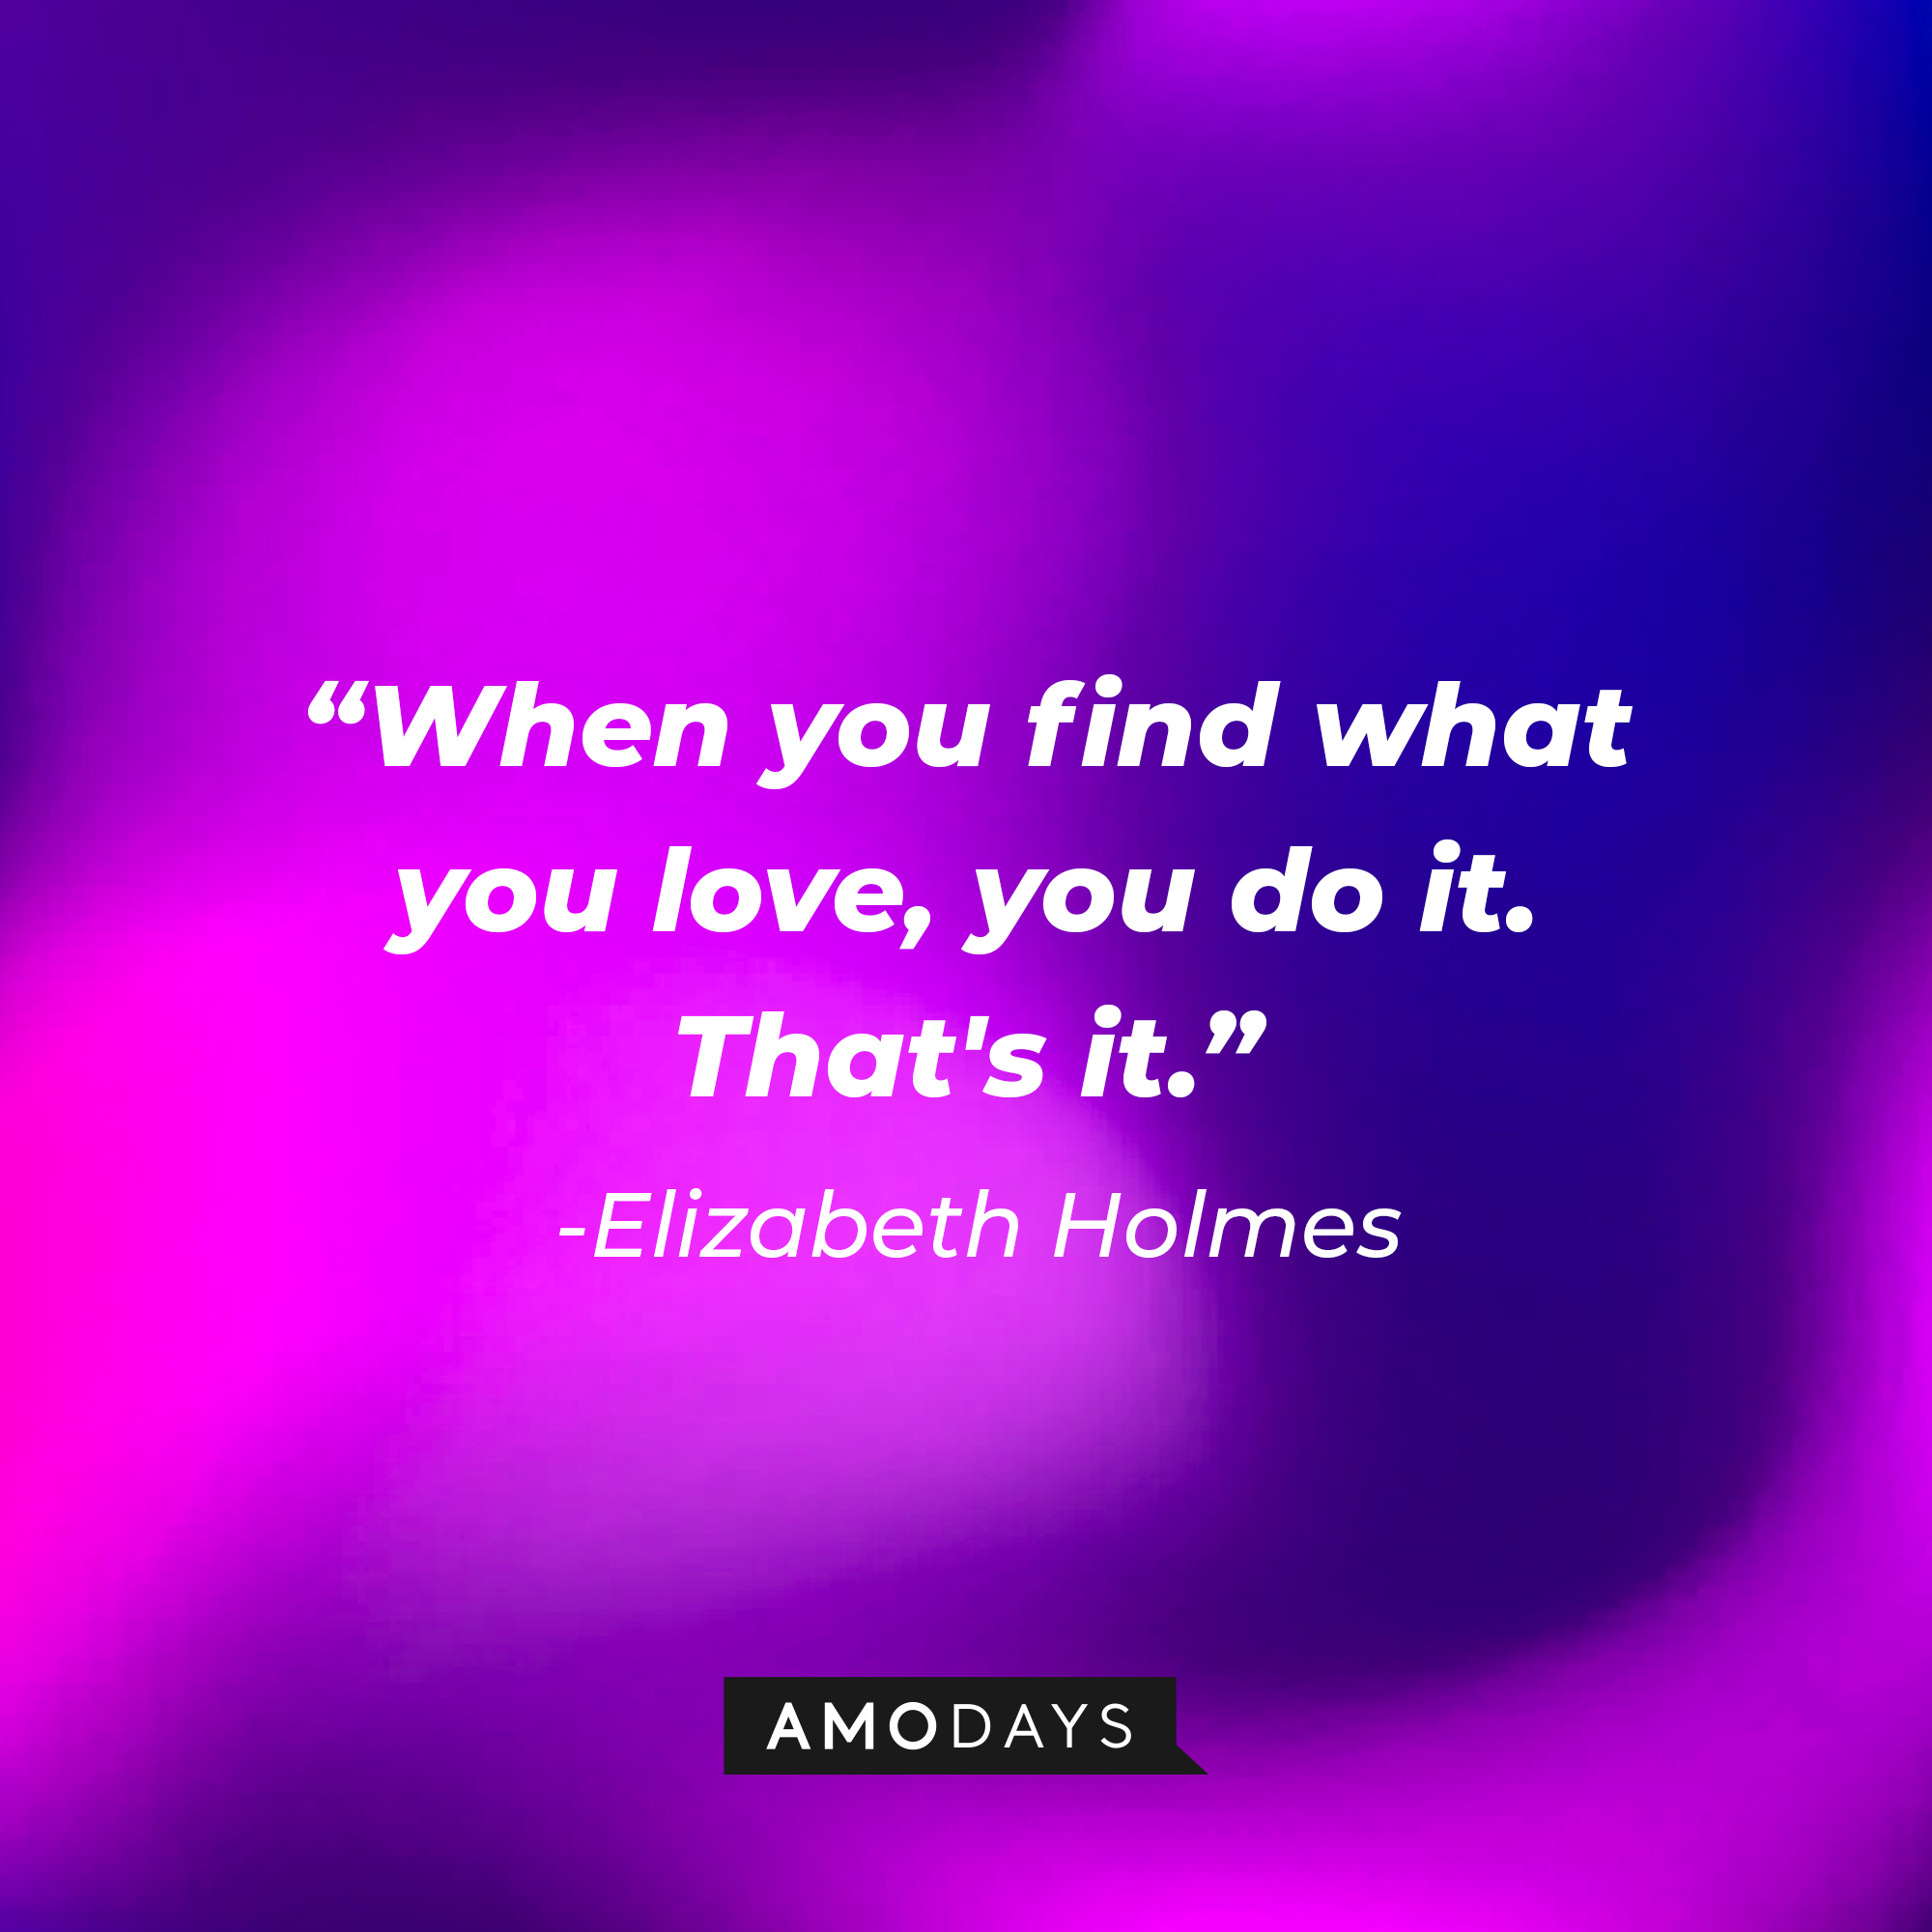 Elizabeth Holmes' quote: "When you find what you love, you do it. That's it." | Source: Amodays